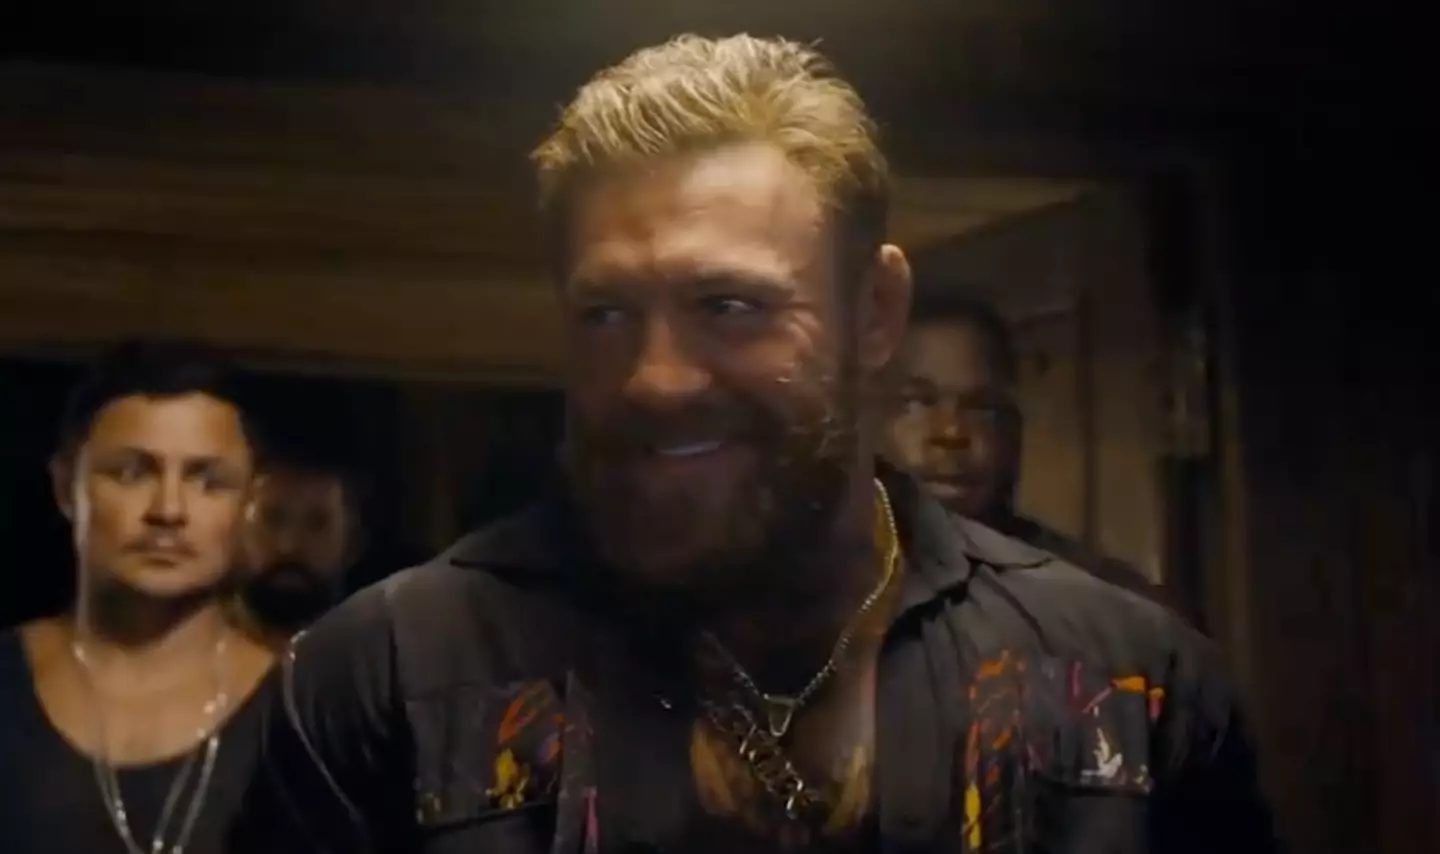 Conor McGregor looks like he's enjoying being the bad guy in Road House.